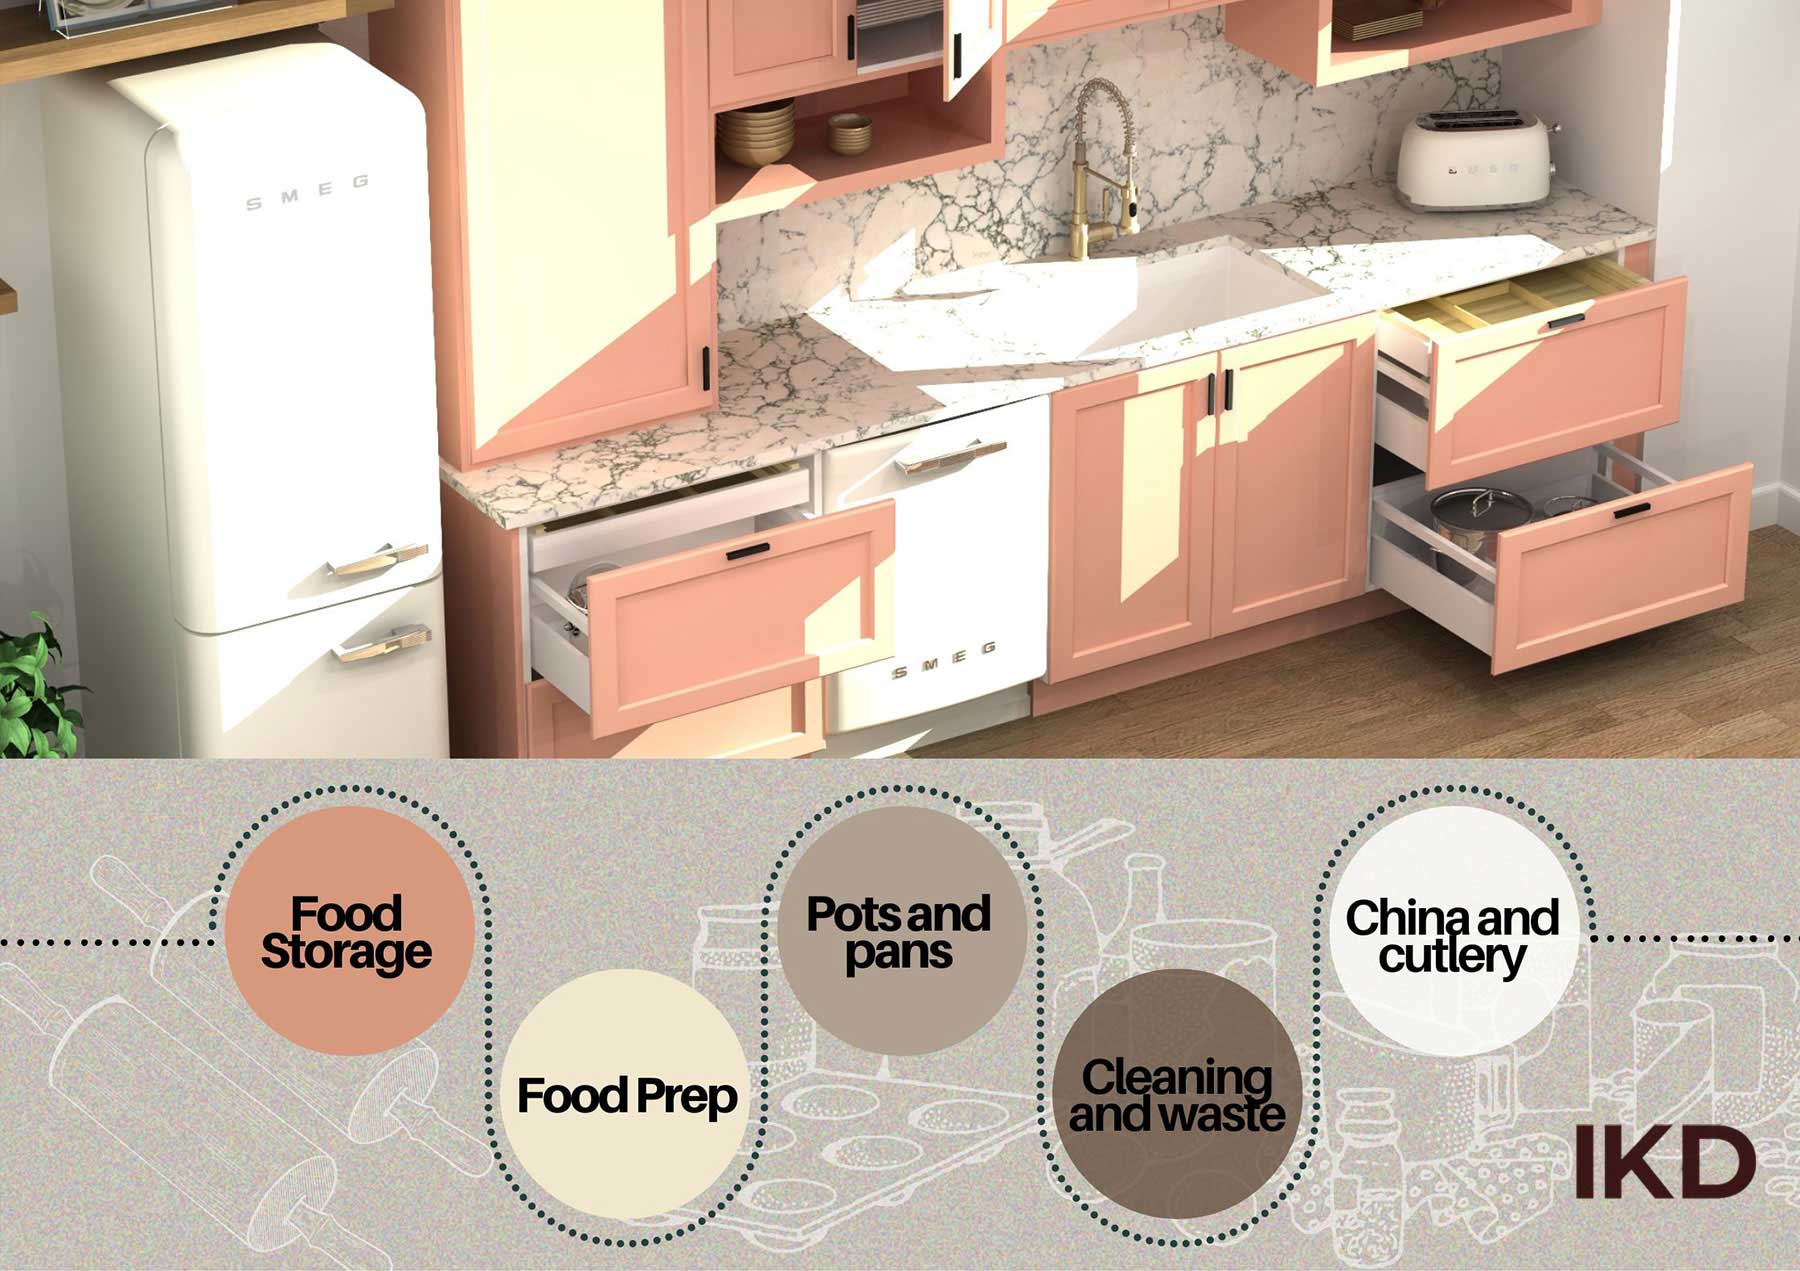 Factors to consider when budgeting for kitchen organization